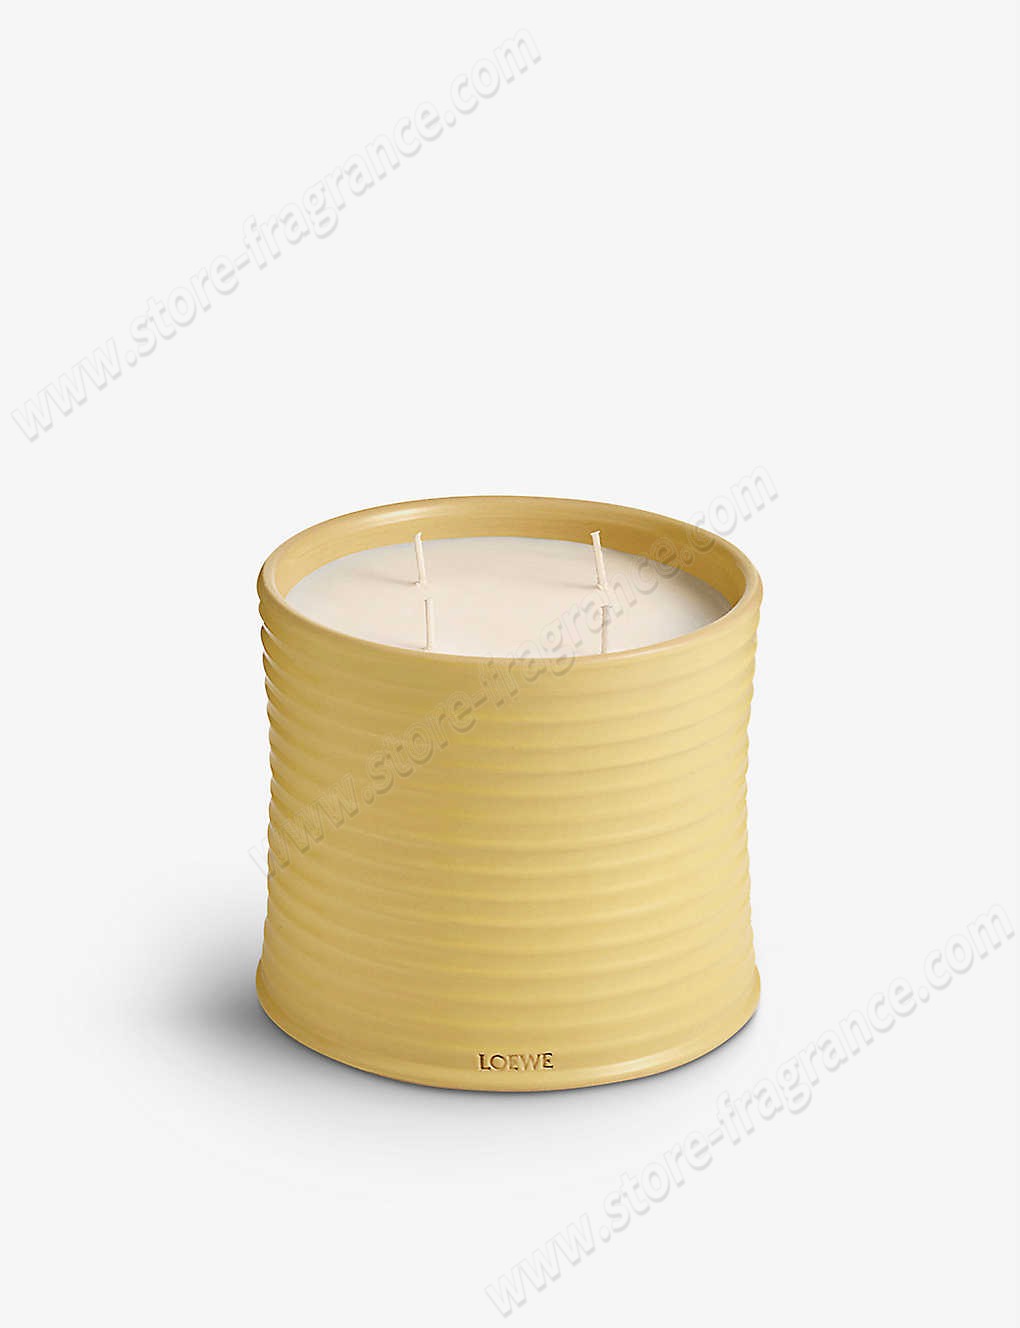 LOEWE/Honeysuckle large scented candle 2120g ✿ Discount Store - -0